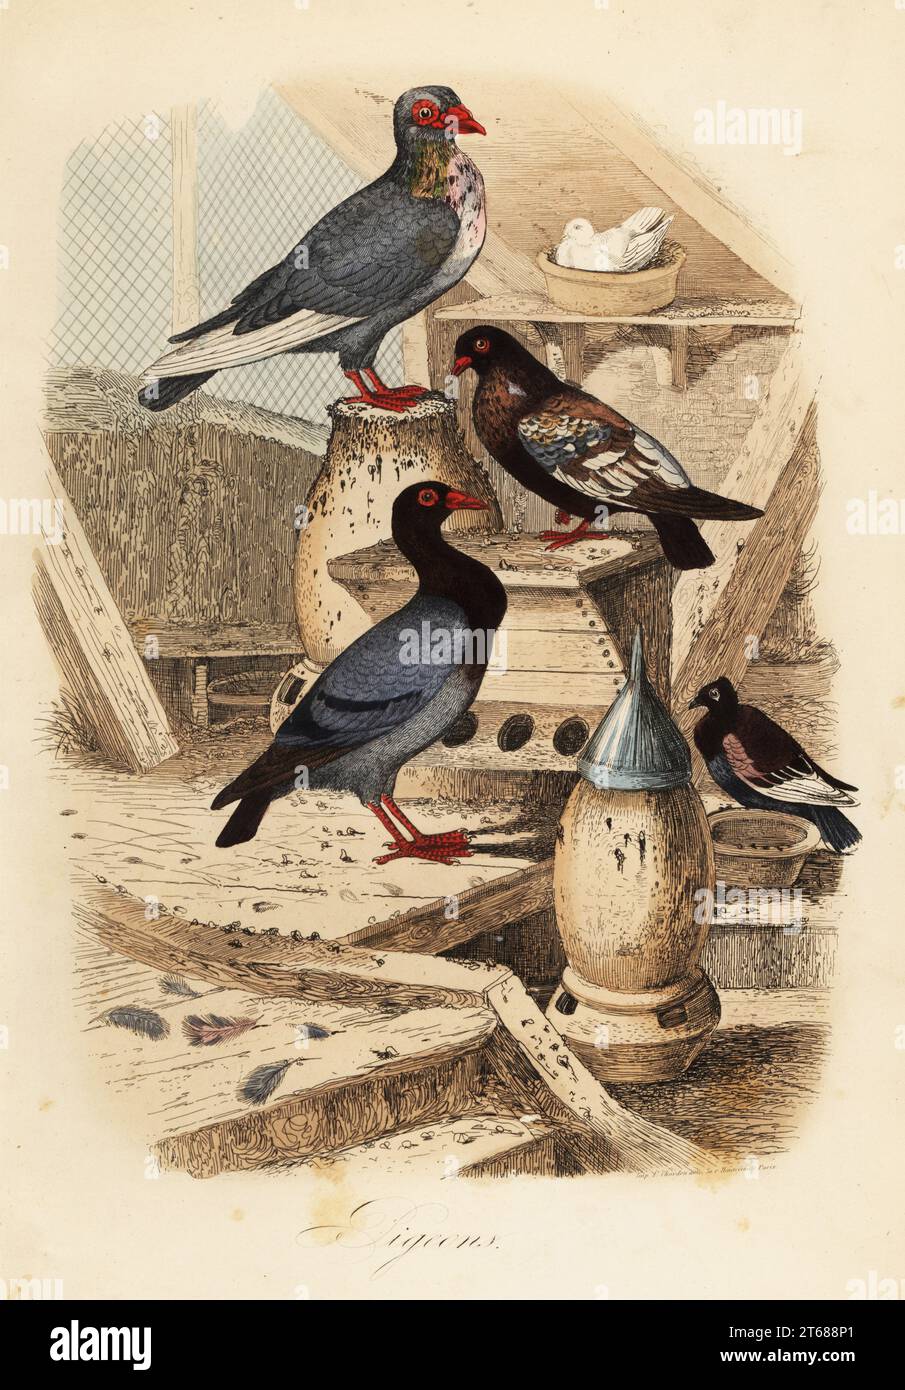 Pigeon Columba livia breeds: Pigeon turc ordinaire, bai dore suisse, bagadais batard. Copied from an lustration by Adolph Fries in Felix-Edouard Guerin-Meneville's Dictionnaire Pittoresque d'Histoire Naturelle. Handcoloured steel engraving printed by F. Chardon from Achille Comtes Musee dHistoire Naturelle, Museum of Natural History, Gustave Hazard, Paris, 1854. Stock Photo